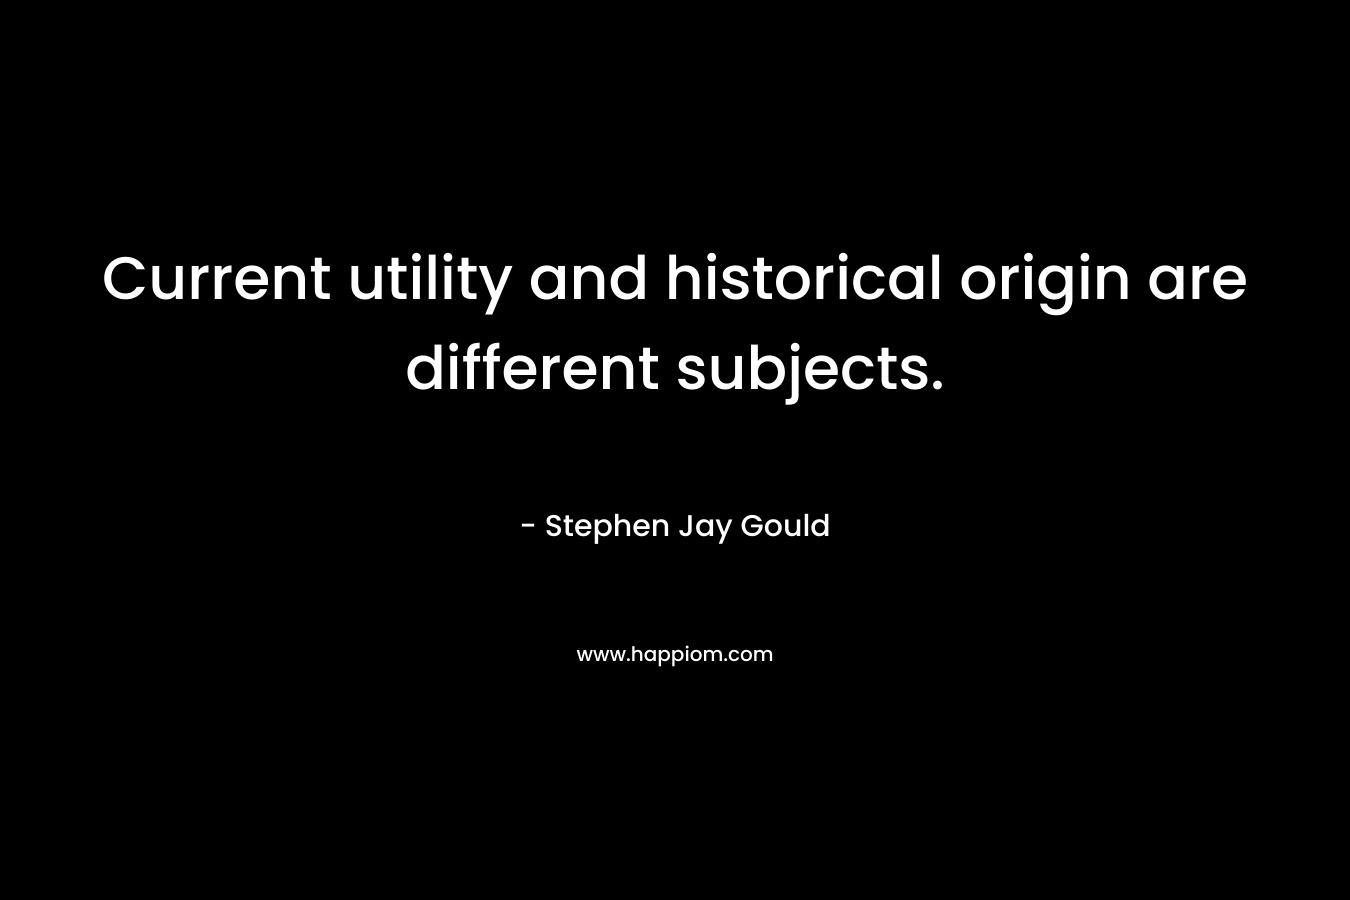 Current utility and historical origin are different subjects. – Stephen Jay Gould